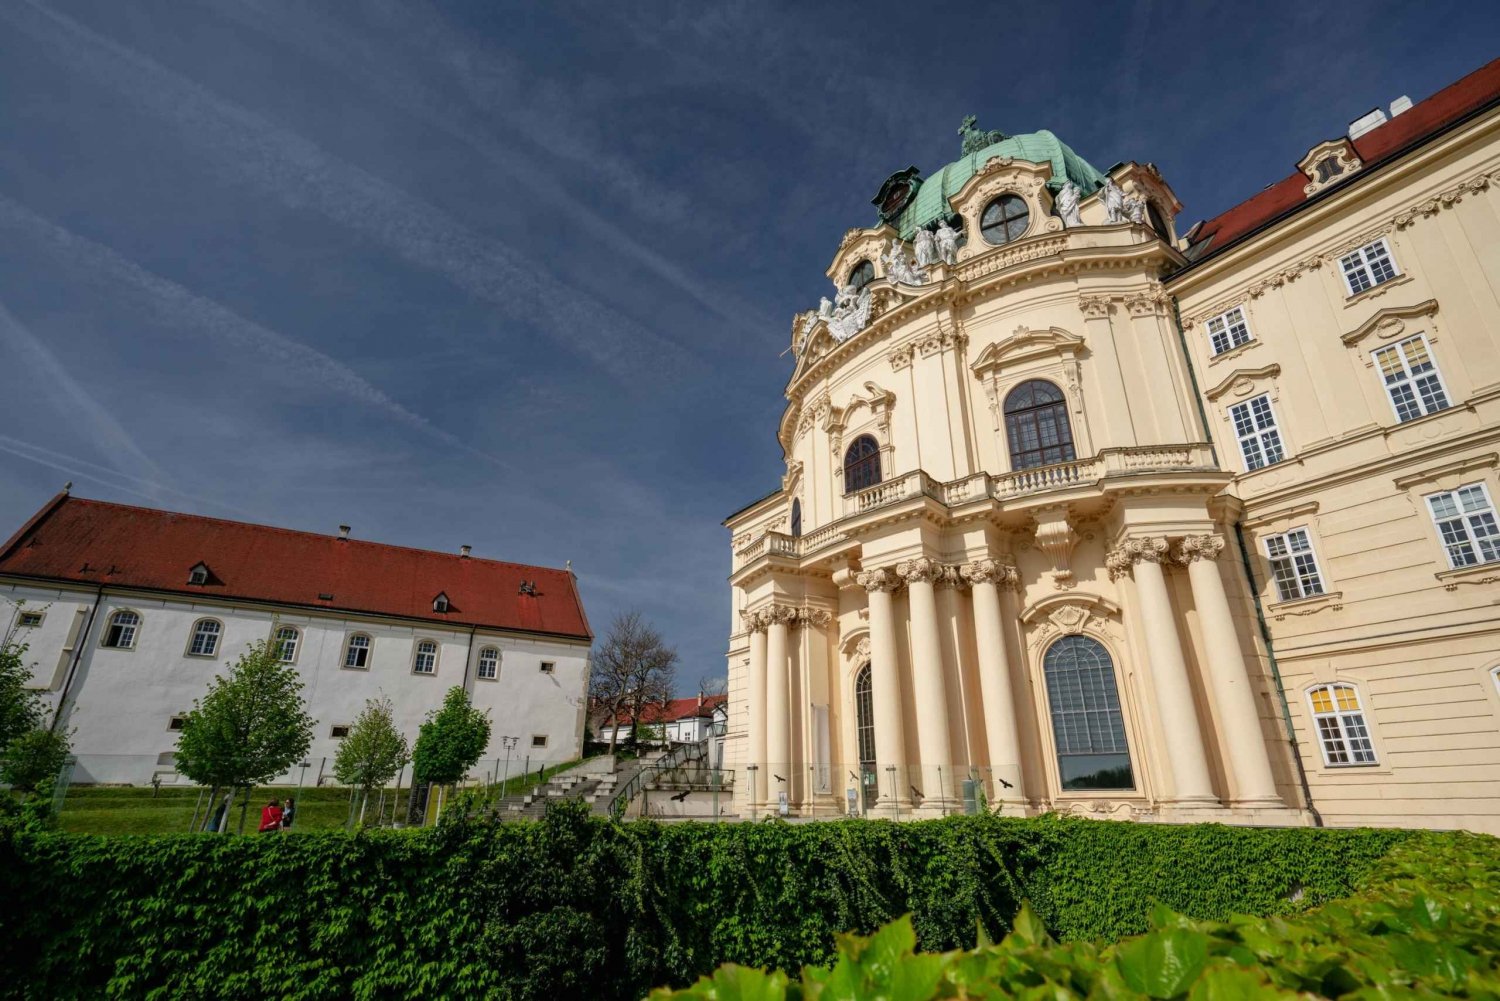 Vienna: Danube Valley 3 Castles and Wine Tasting Tour